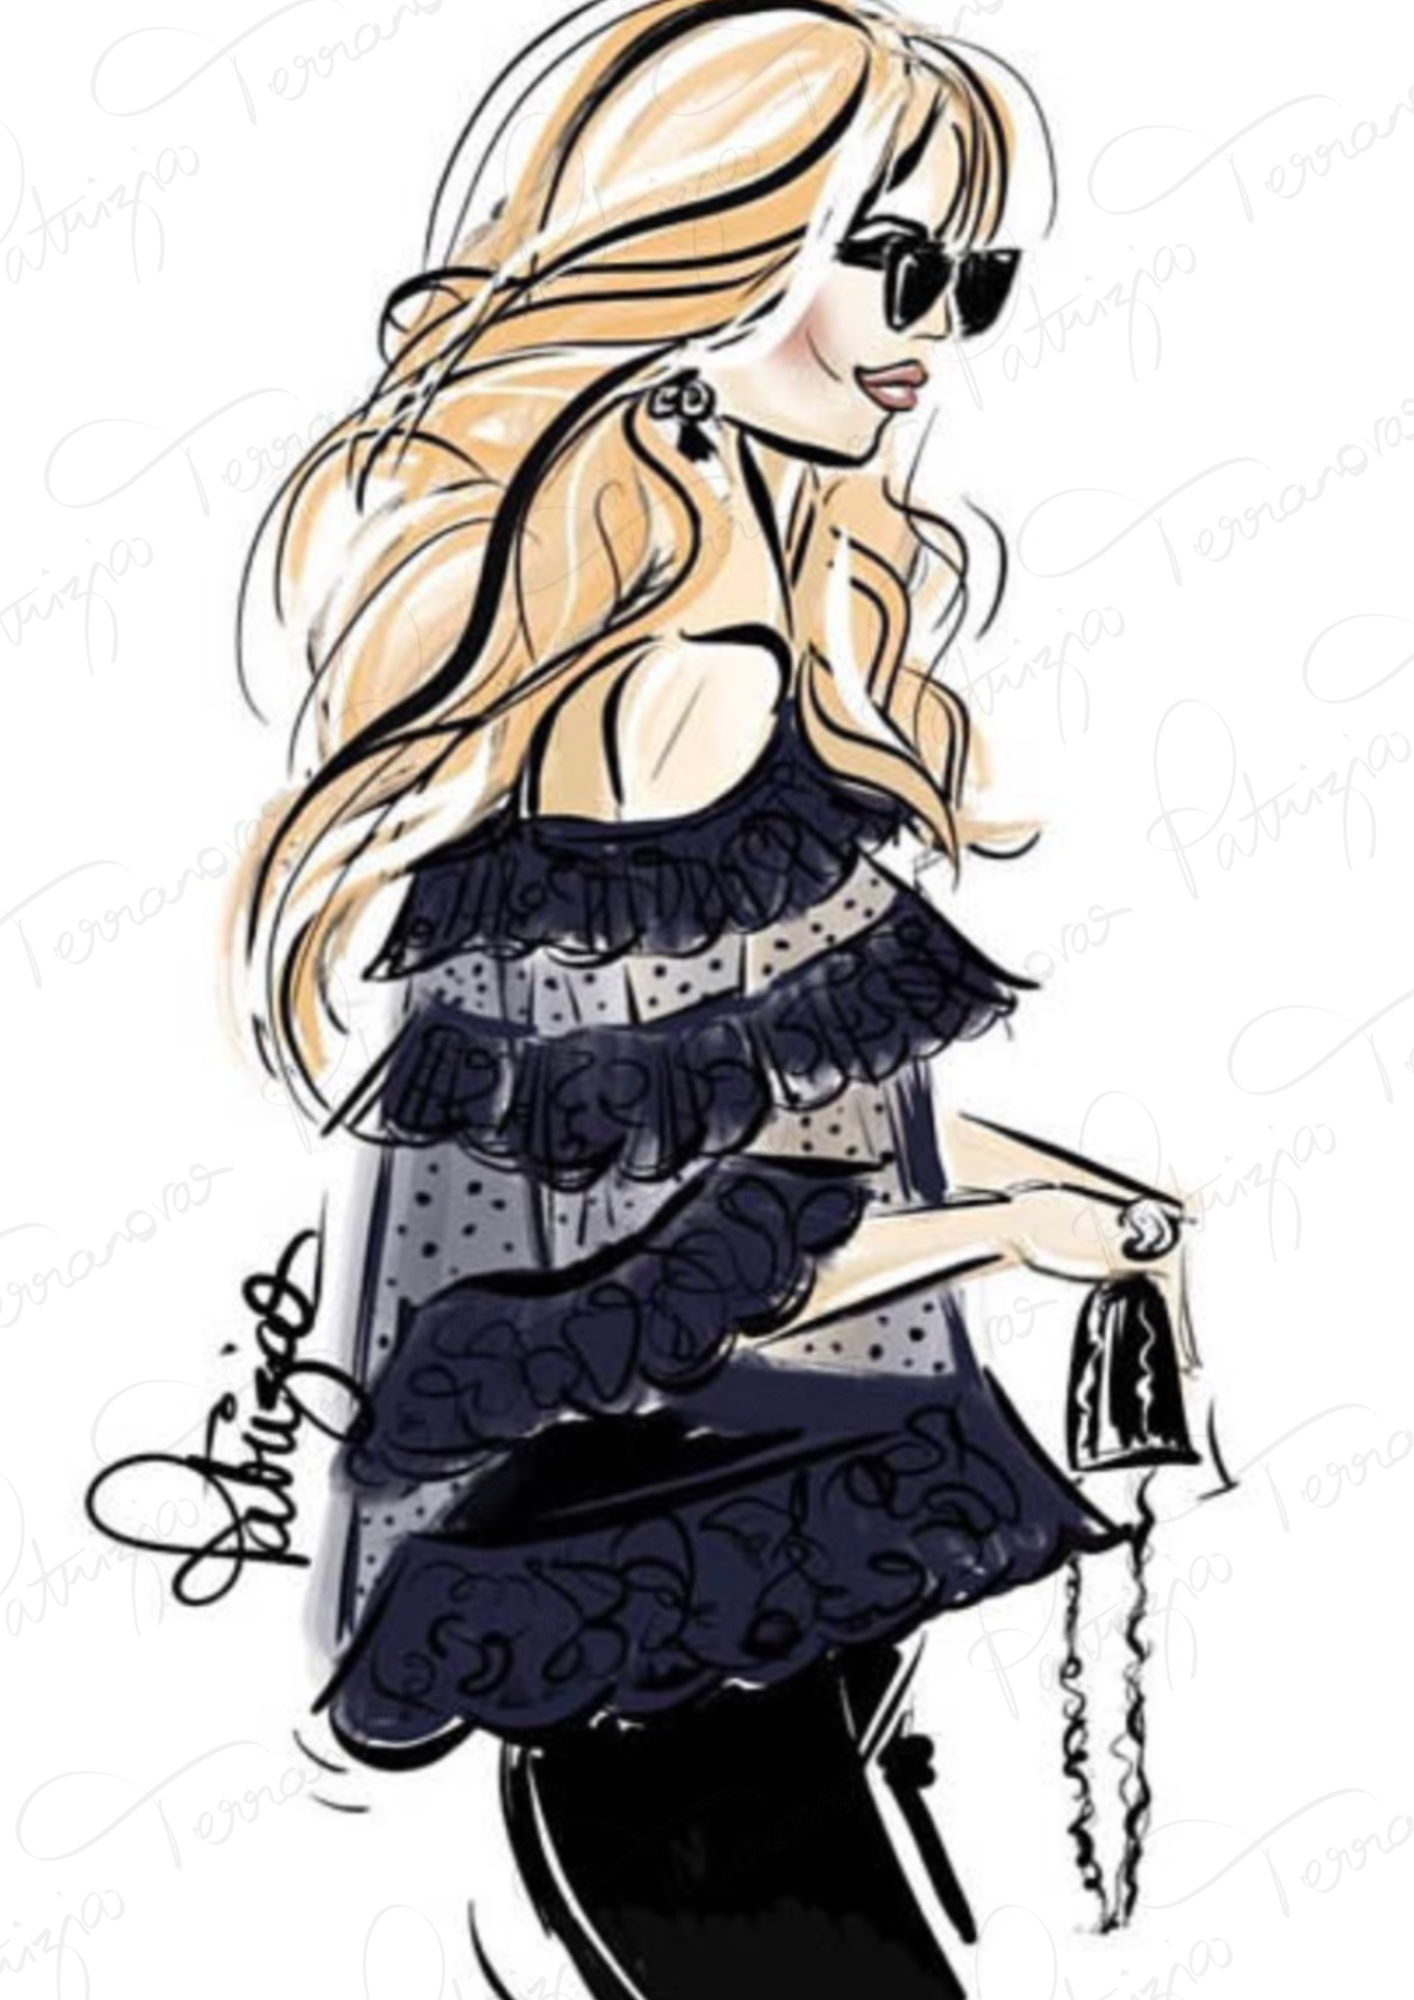 Art Print - Have A Tres Chic Afternoon